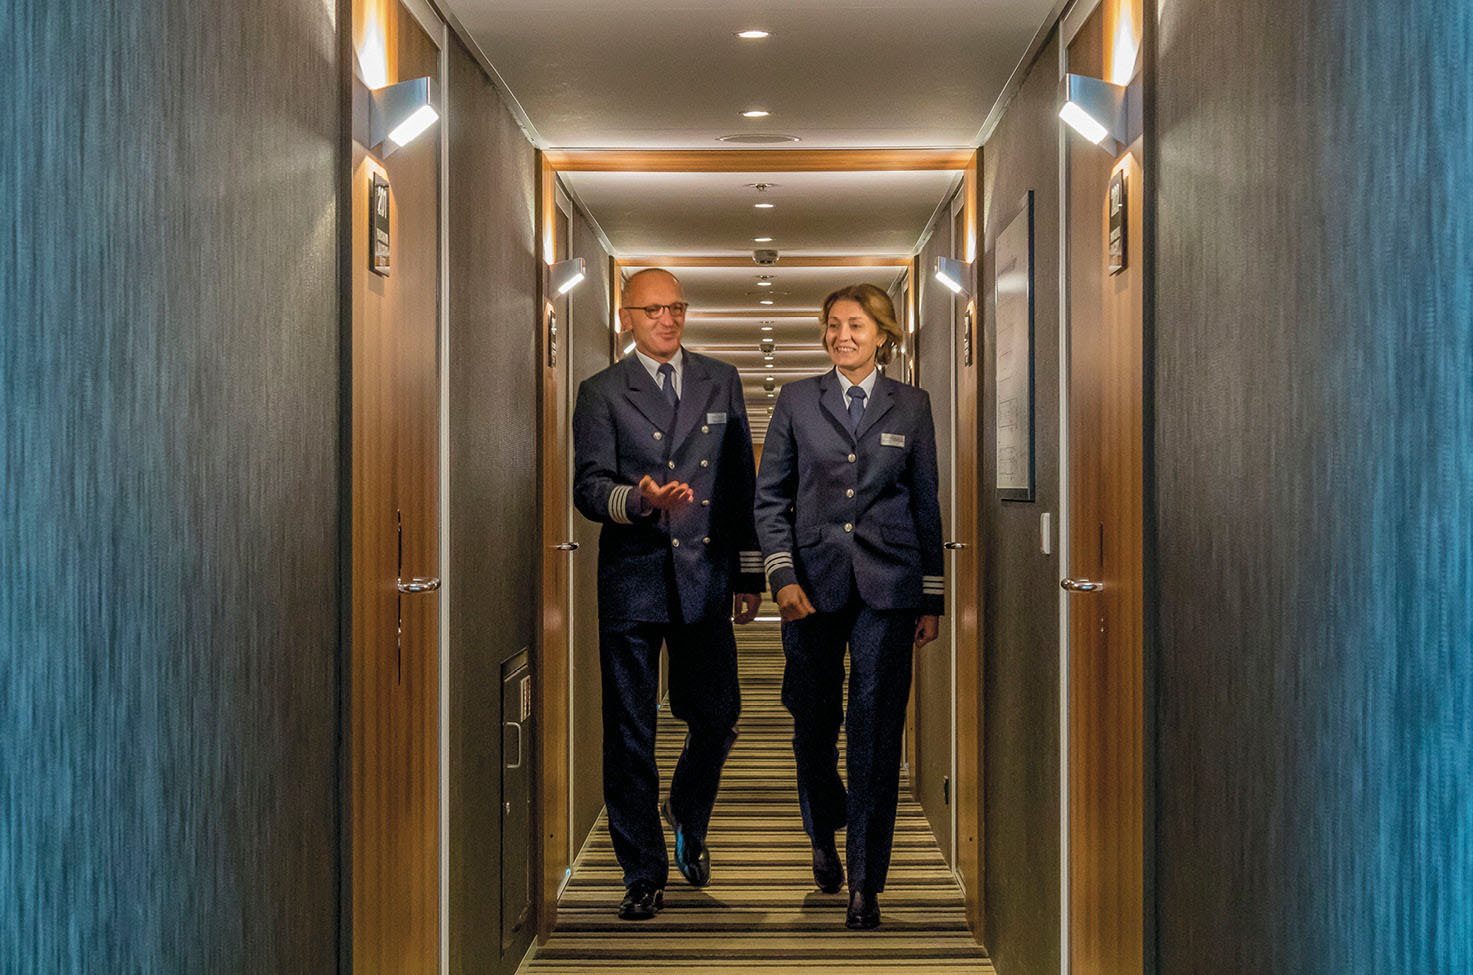 Two cruise ship members walking a corridor and talking to each other